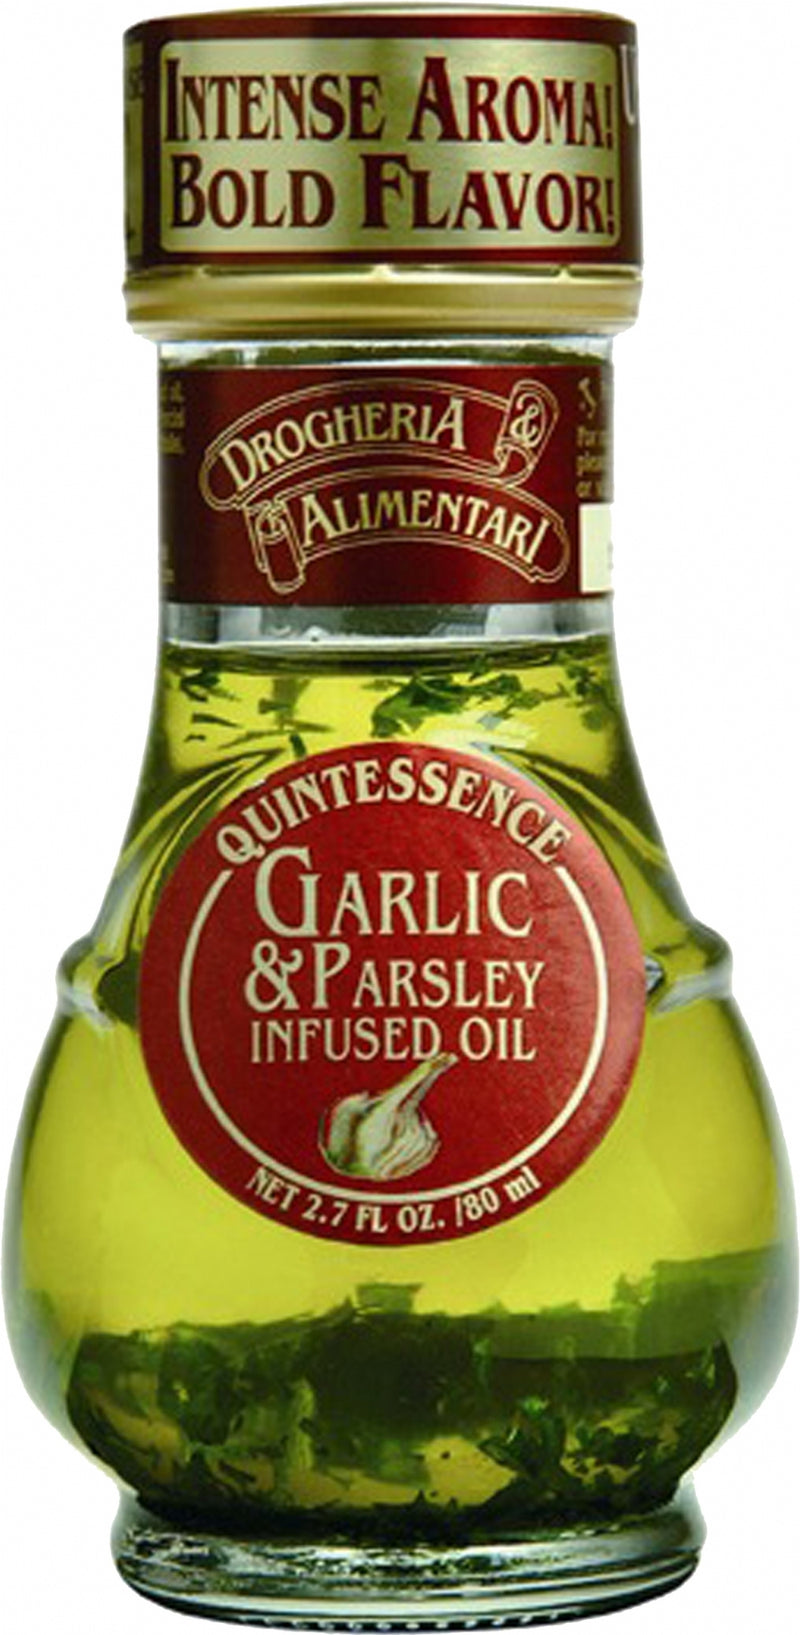 Garlic & parsley infused oil bottled in an attractive glass jar. The cold infusion process of fresh herbs in oil retains the intense aromatic characteristics of the herbs.  Ingredients Sunflower oil, extra virgin olive oil, garlic, freeze-dried parsley, natural extract of garlic, flavour  Allergy Advice For allergens please see ingredients in bold.